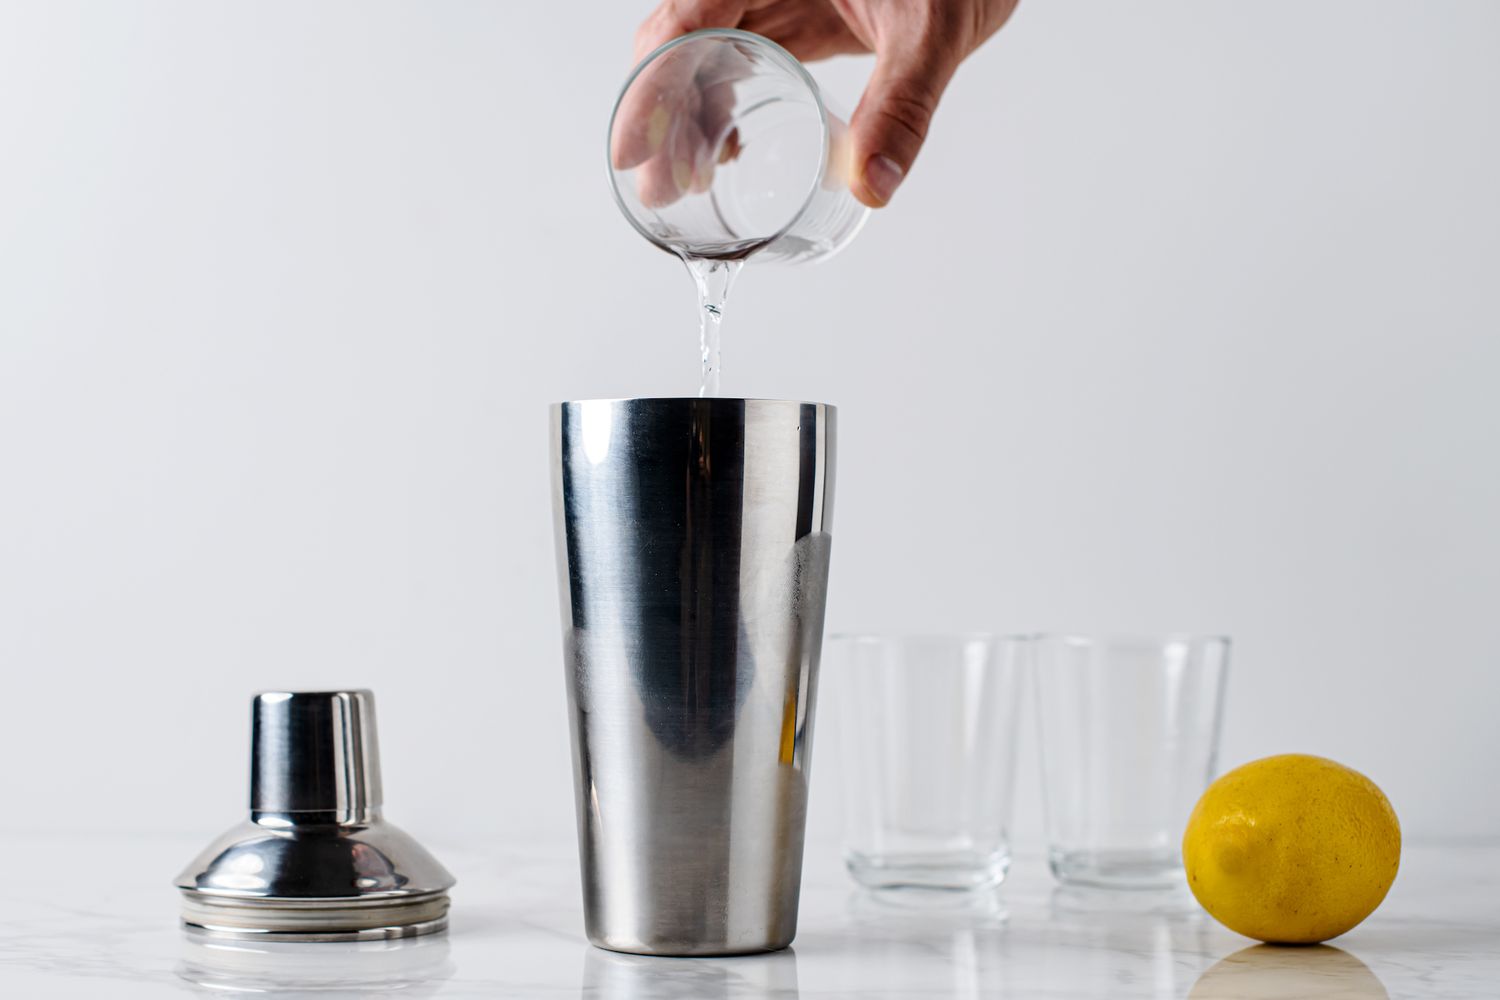 Ingredients being poured into the cocktail shaker for James Bond's Vesper martini